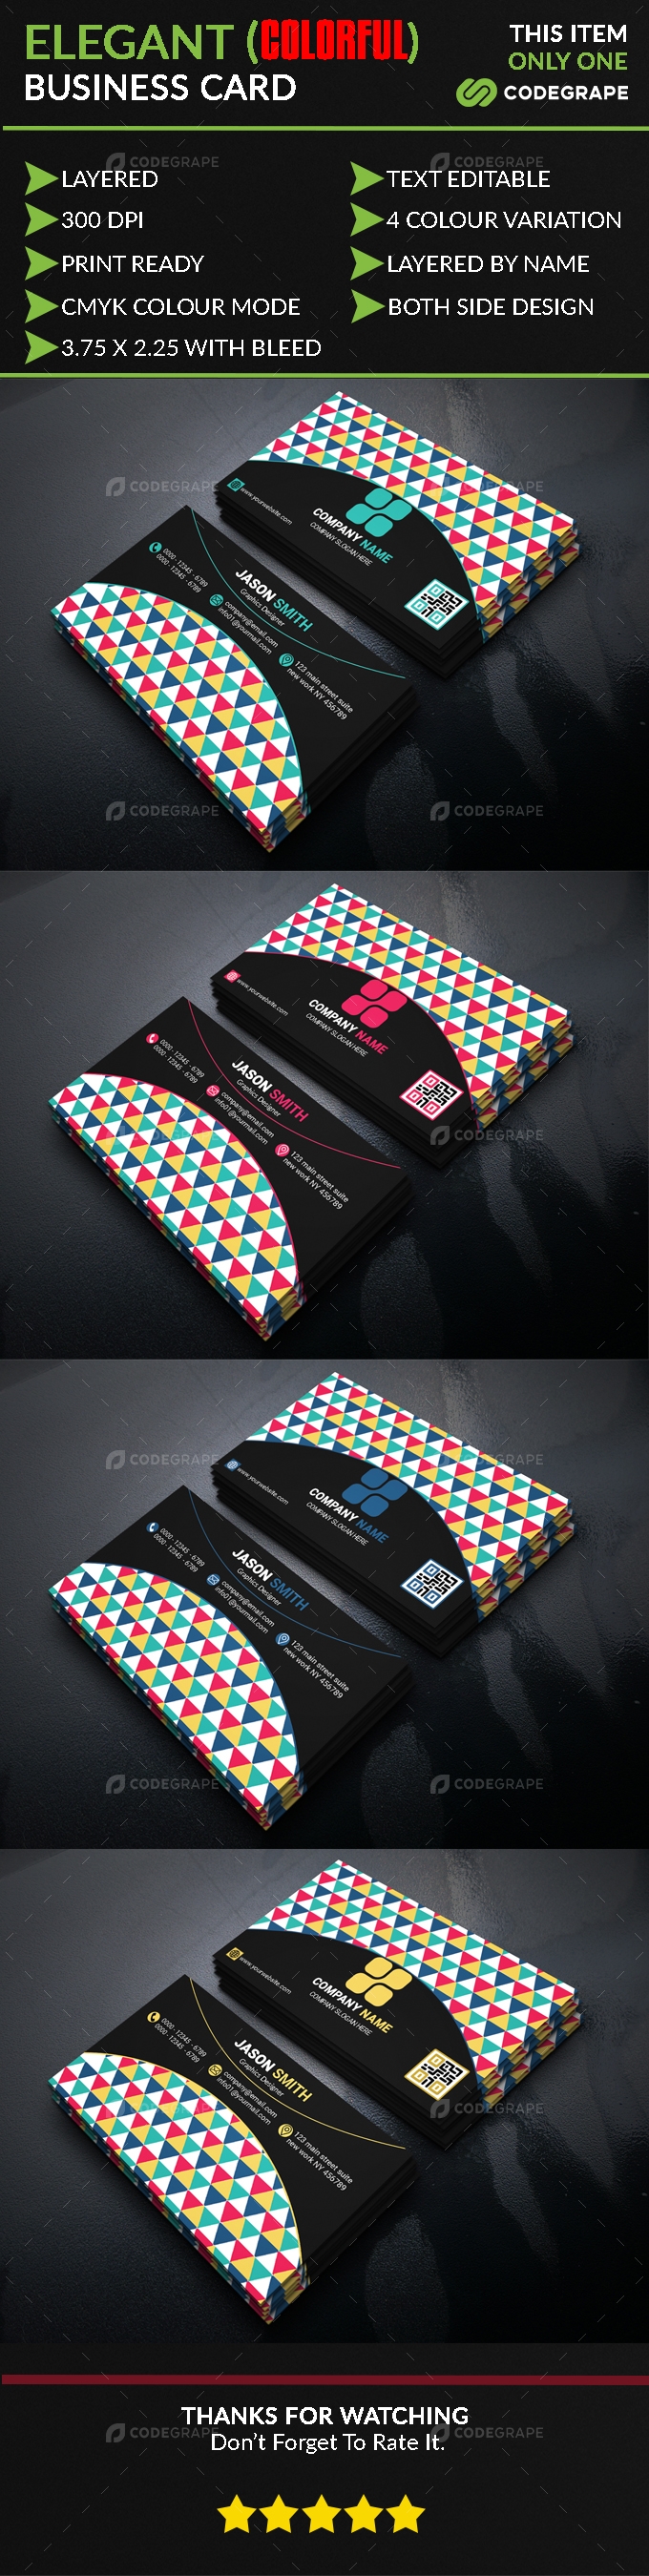 Elegant Colorful Business Card Template